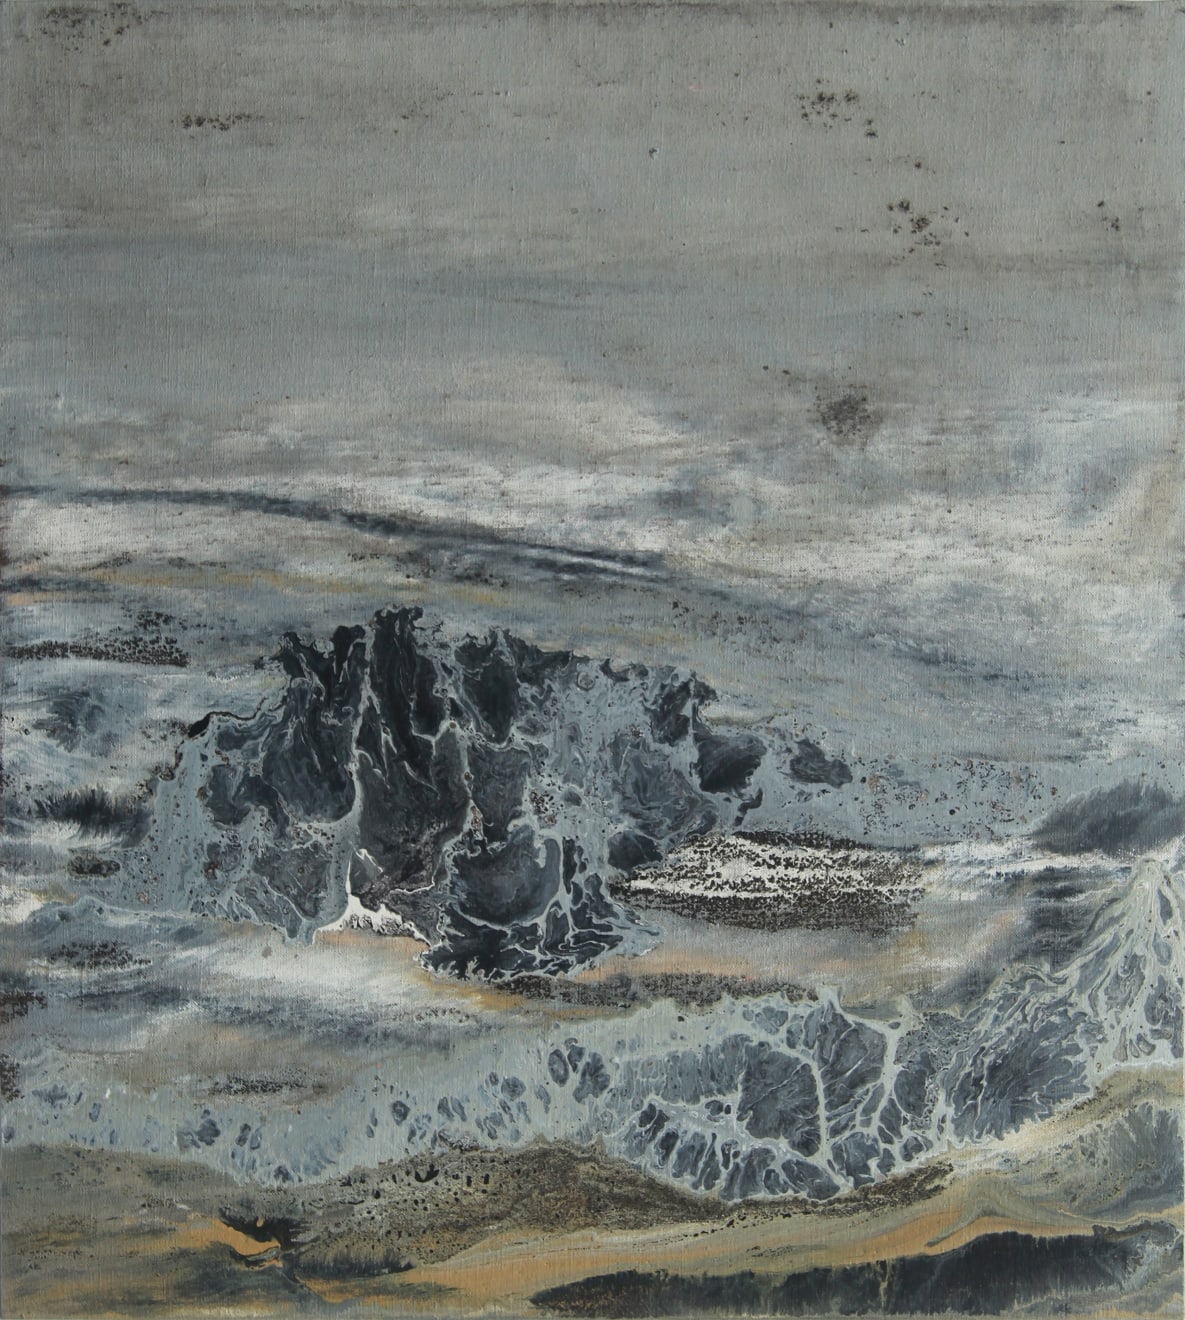 Estuary 07 Oil and Acrylic on Linen Mounted Board 53 x 63.5cm AUD $ 1400 SOLD